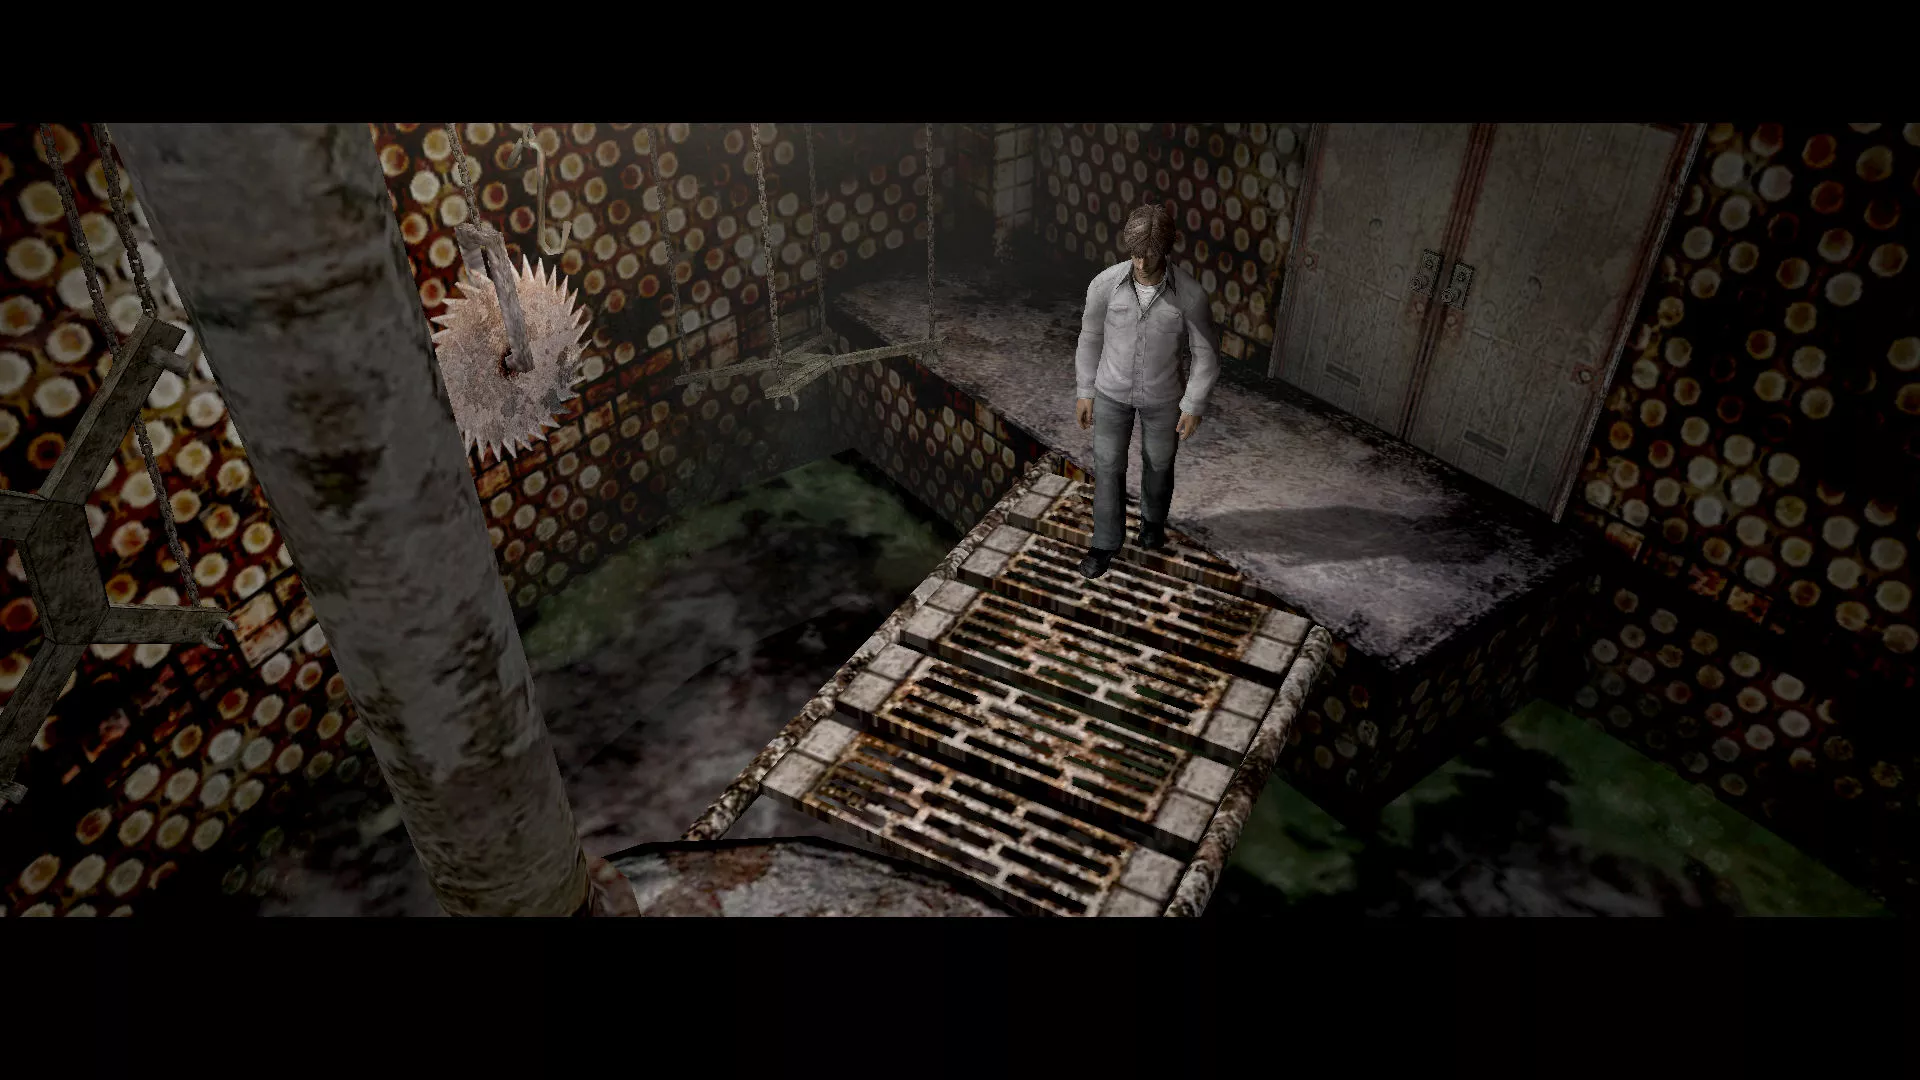 Silent Hill 4: The Room for PC now available via GOG - Gematsu